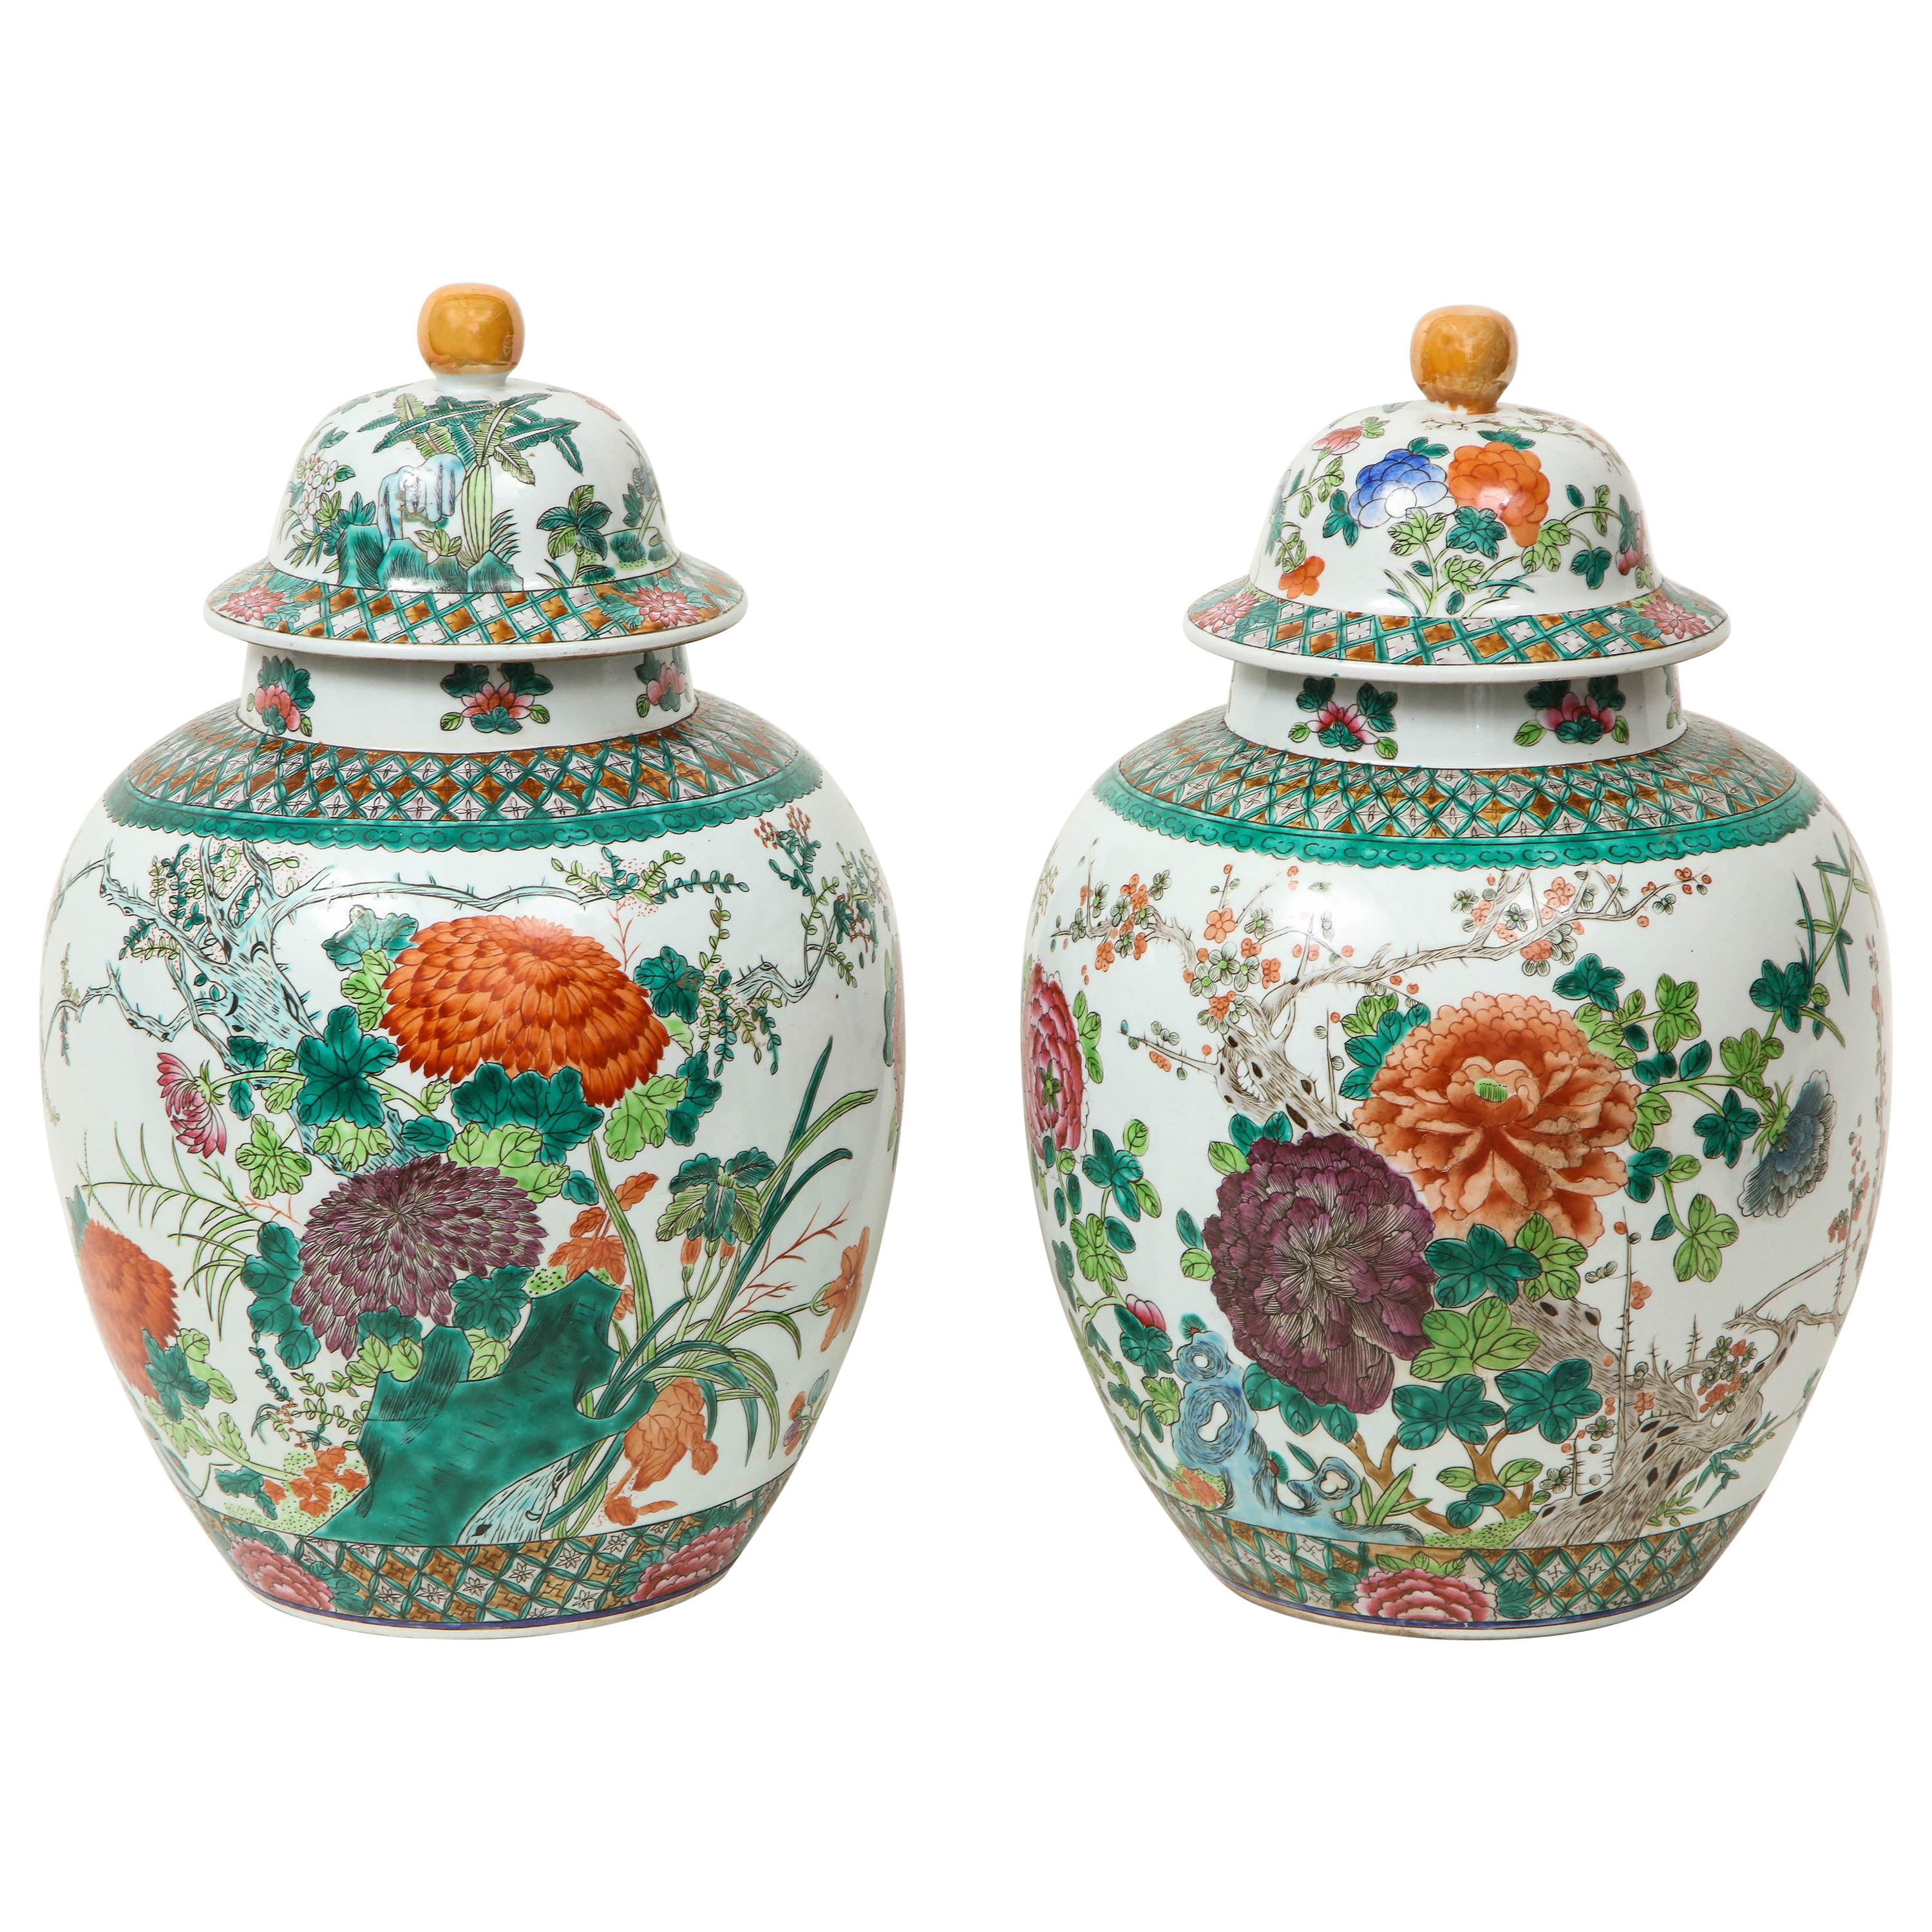 Large Pair of Chinese Porcelain Famille Verte Covered Jars